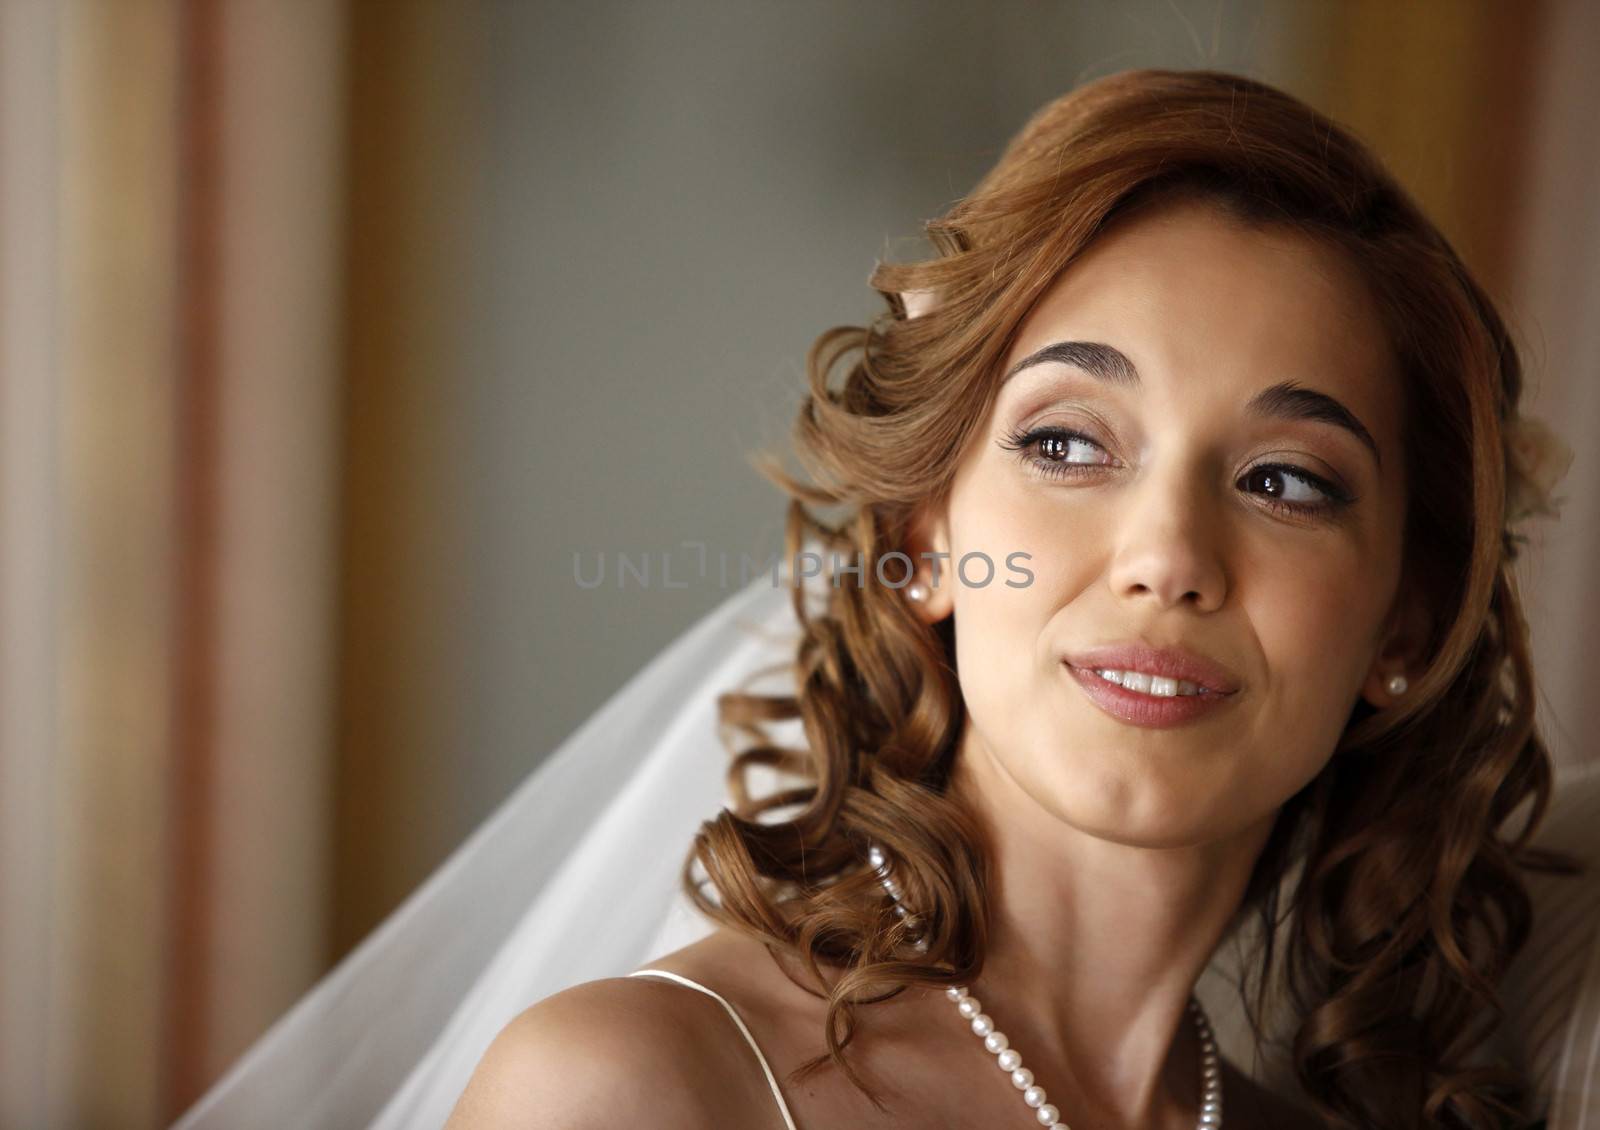 The beautiful bride on a dim background